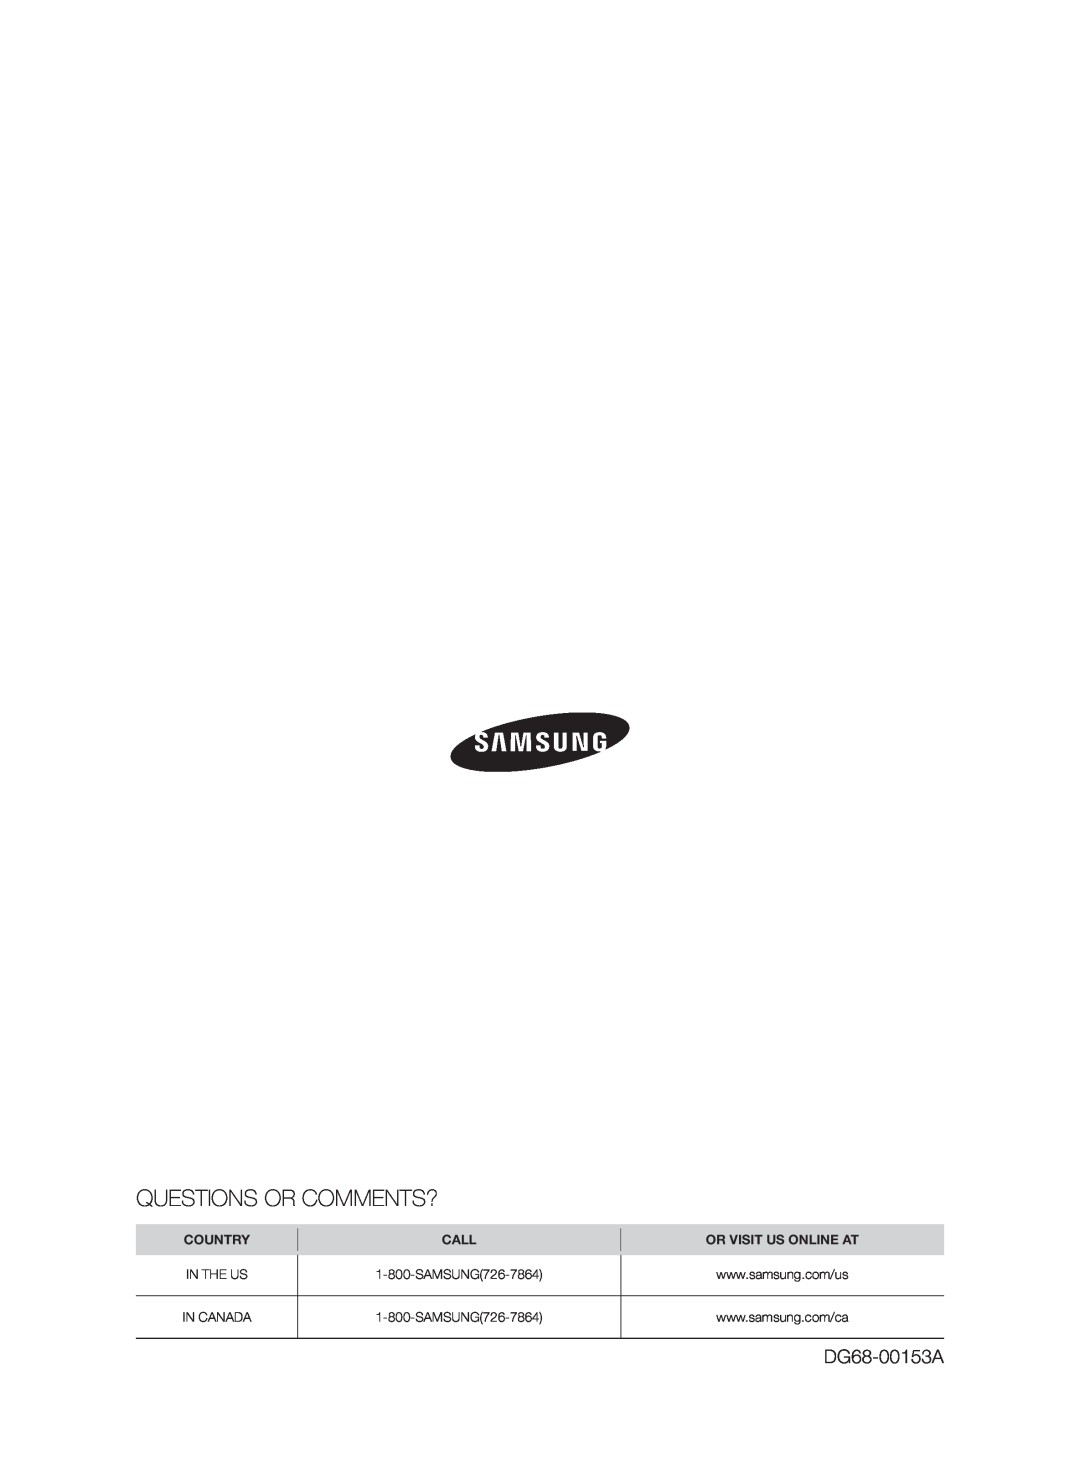 Samsung FCQ321HTUX, FCQ321HTUW, FCQ321HTUB Questions Or Comments?, DG68-00153A, Country, Call, Or Visit Us Online At 